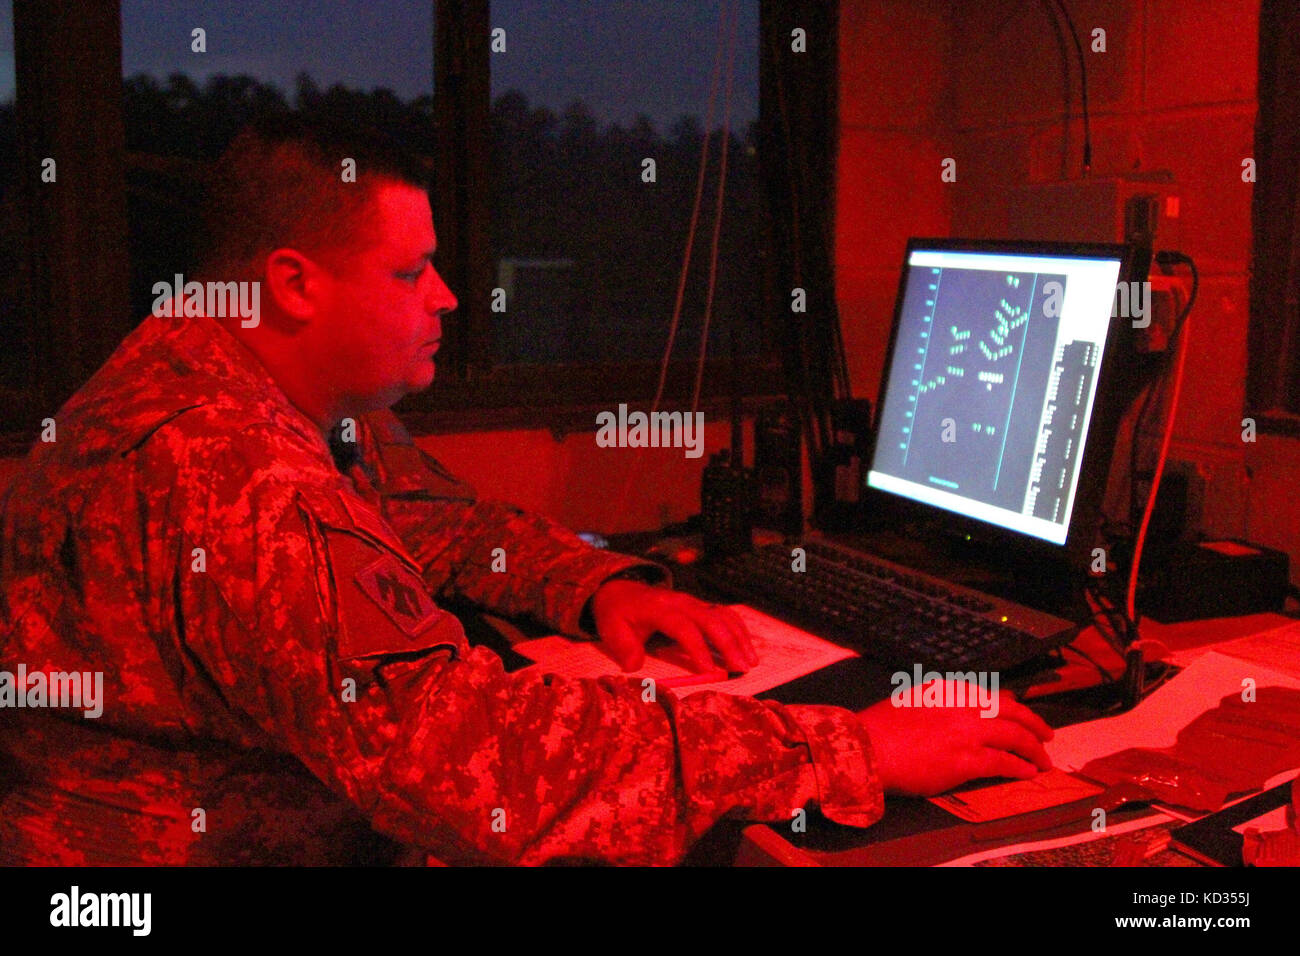 U.S. Army Capt. Plowden Dixon, training officer with the  1-118th Infantry Battalion, South Carolina Army National Guard, watches the computer screen in the range tower as Soldiers on the range conduct night exercises June 19, 2015 during their annual training at Fort Stewart, Georgia. The screen displays targets the Soldiers must engage which helps keep track of hits. The battalion spent nearly two weeks conducting training in a variety of squad and company level events as part of their annual training. This training helps them prepare for both peacetime situations and when they are called up Stock Photo